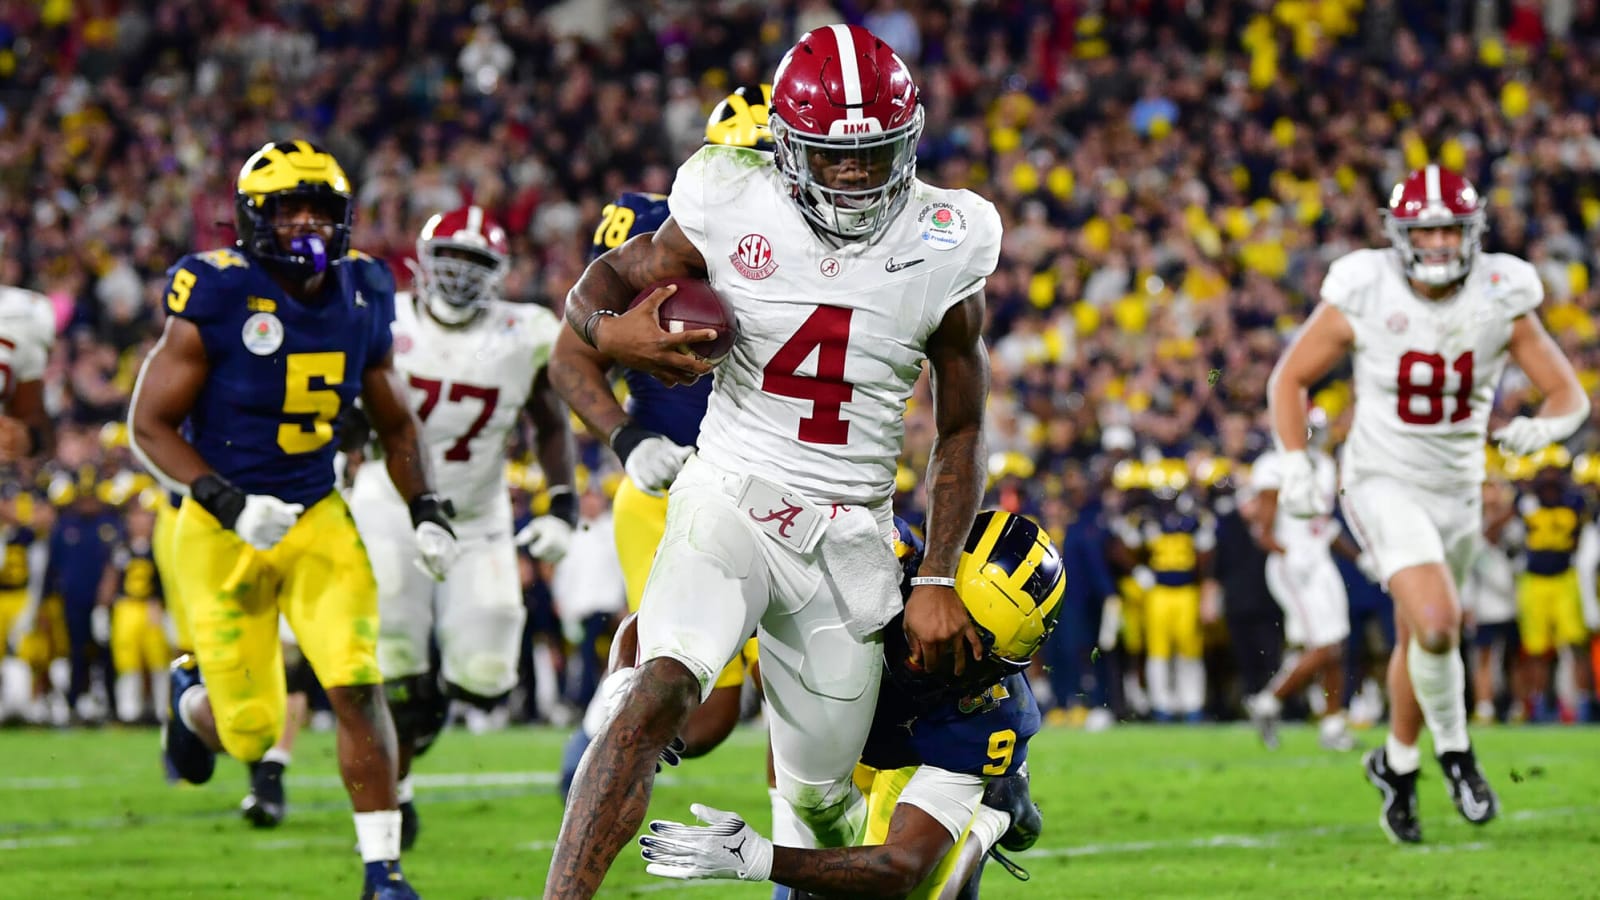 Watch: Alabama makes head-scratching call on fourth down in OT